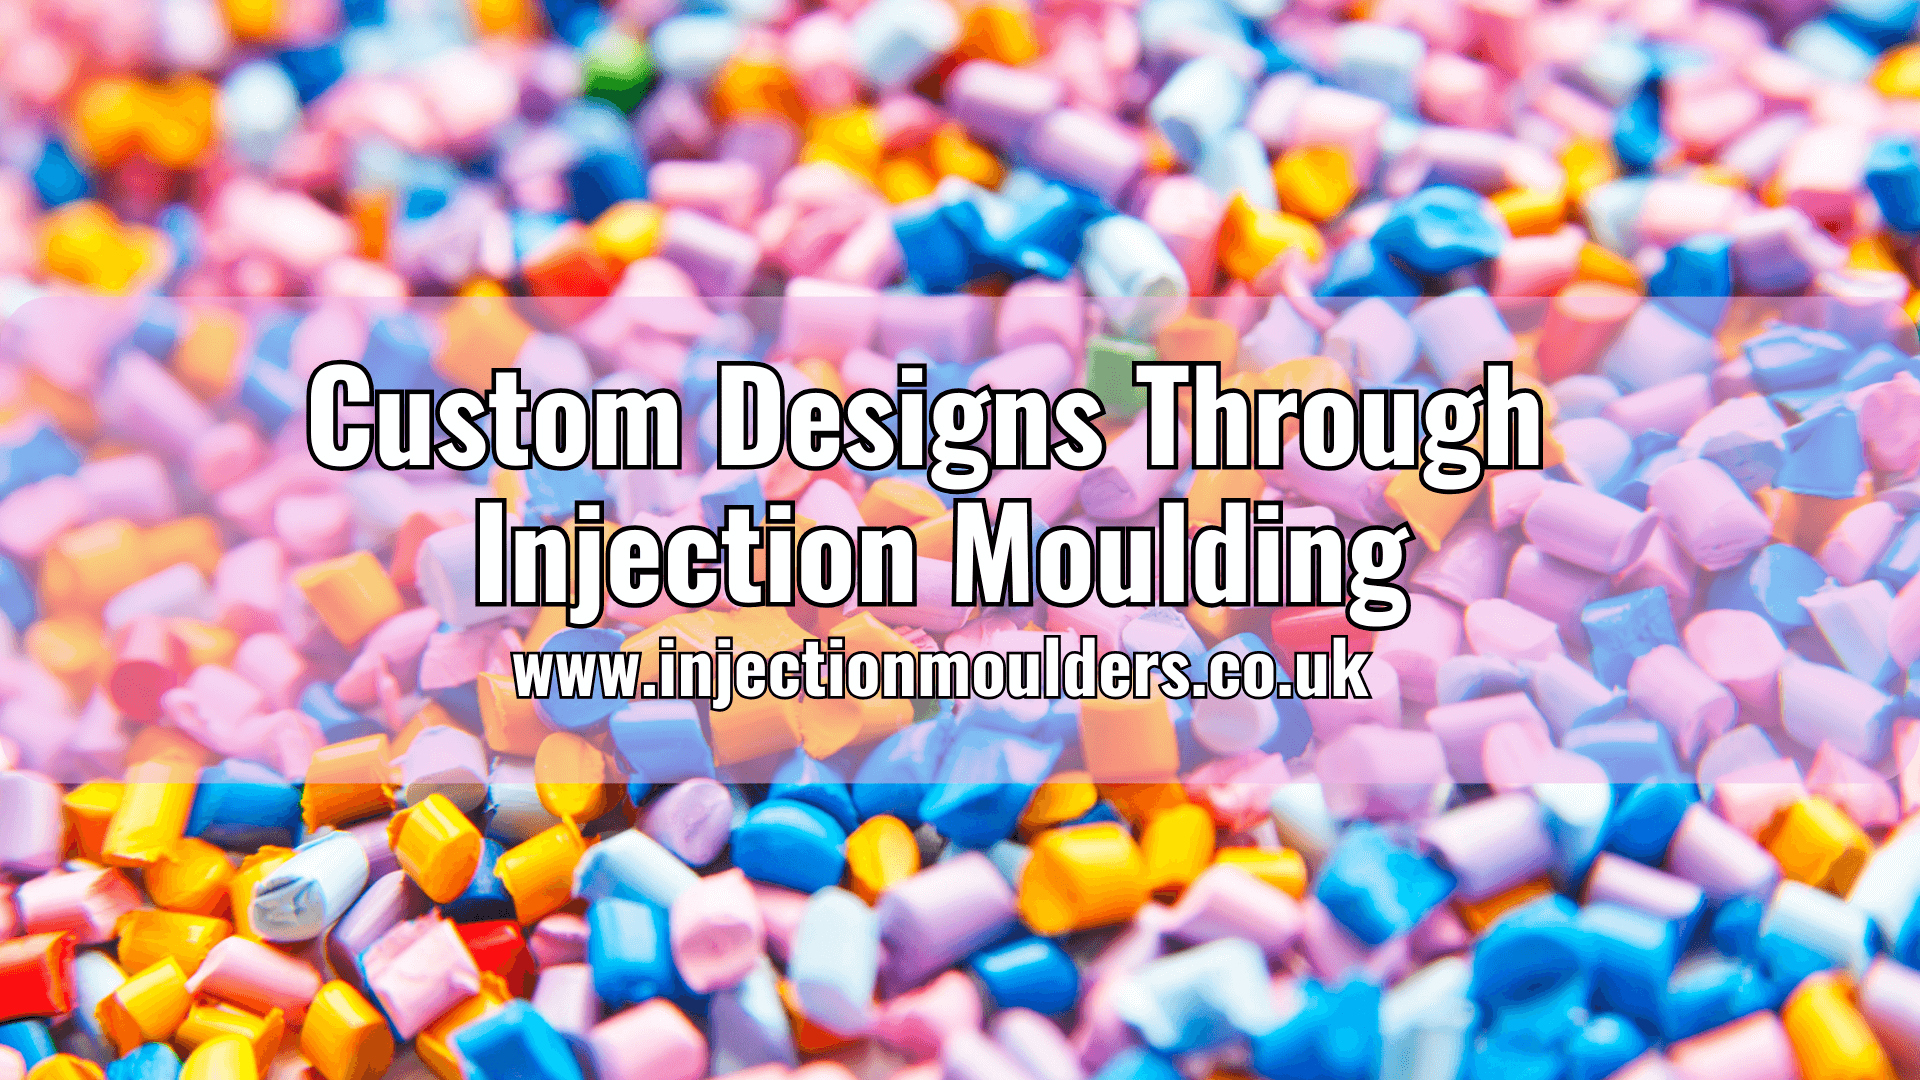 Custom Designs Through Injection Moulding